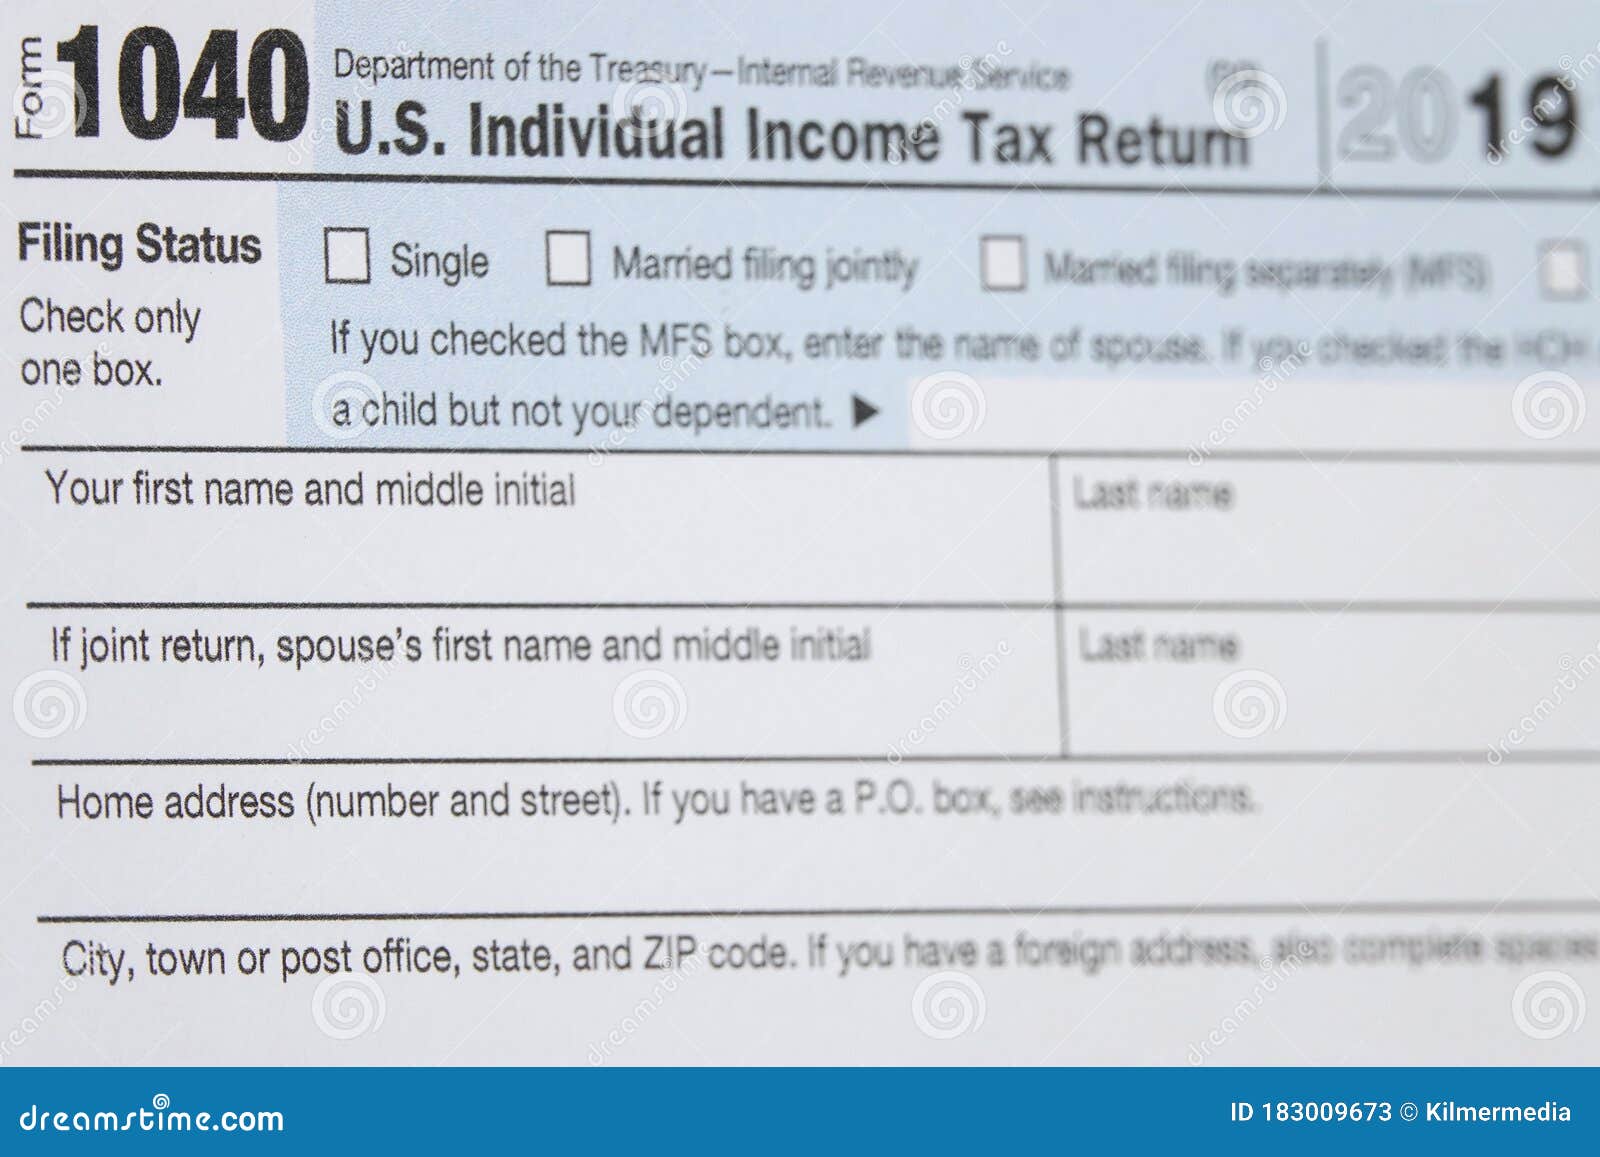 Usa Irs Income Tax Return Form 1040 In 2020 For 2019 Filing Macro Editorial Stock Photo Image Of Form Government 183009673